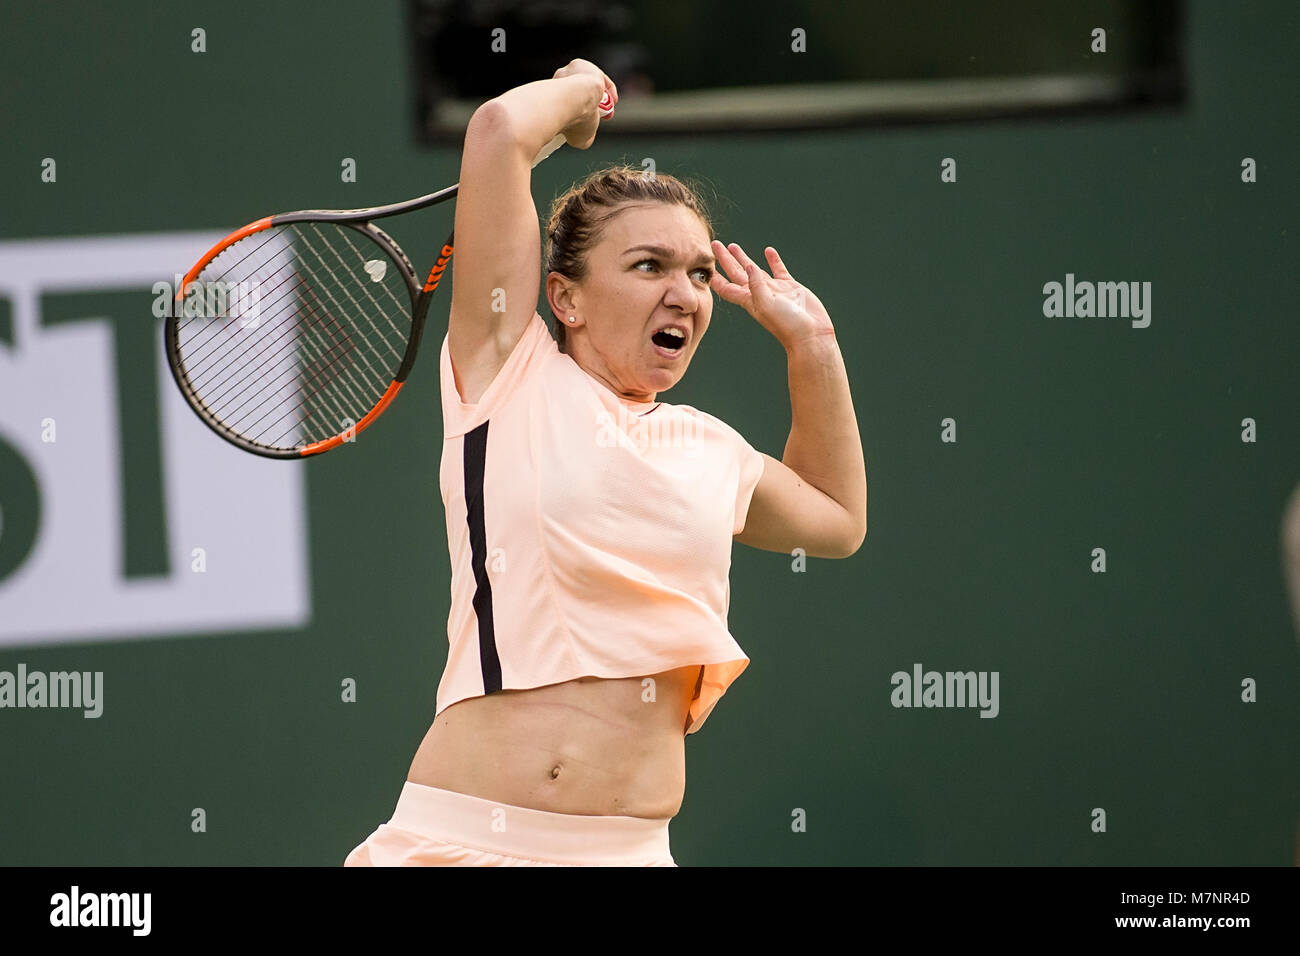 Indian Wells, California, USA. 11th Mar, 2018. Simona Halep (ROU) defeated  Caroline Dolehide (USA) 1-6, 7-6 (3), 6-2 at the BNP Paribas Open played at  the Indian Wells Tennis Garden in Indian